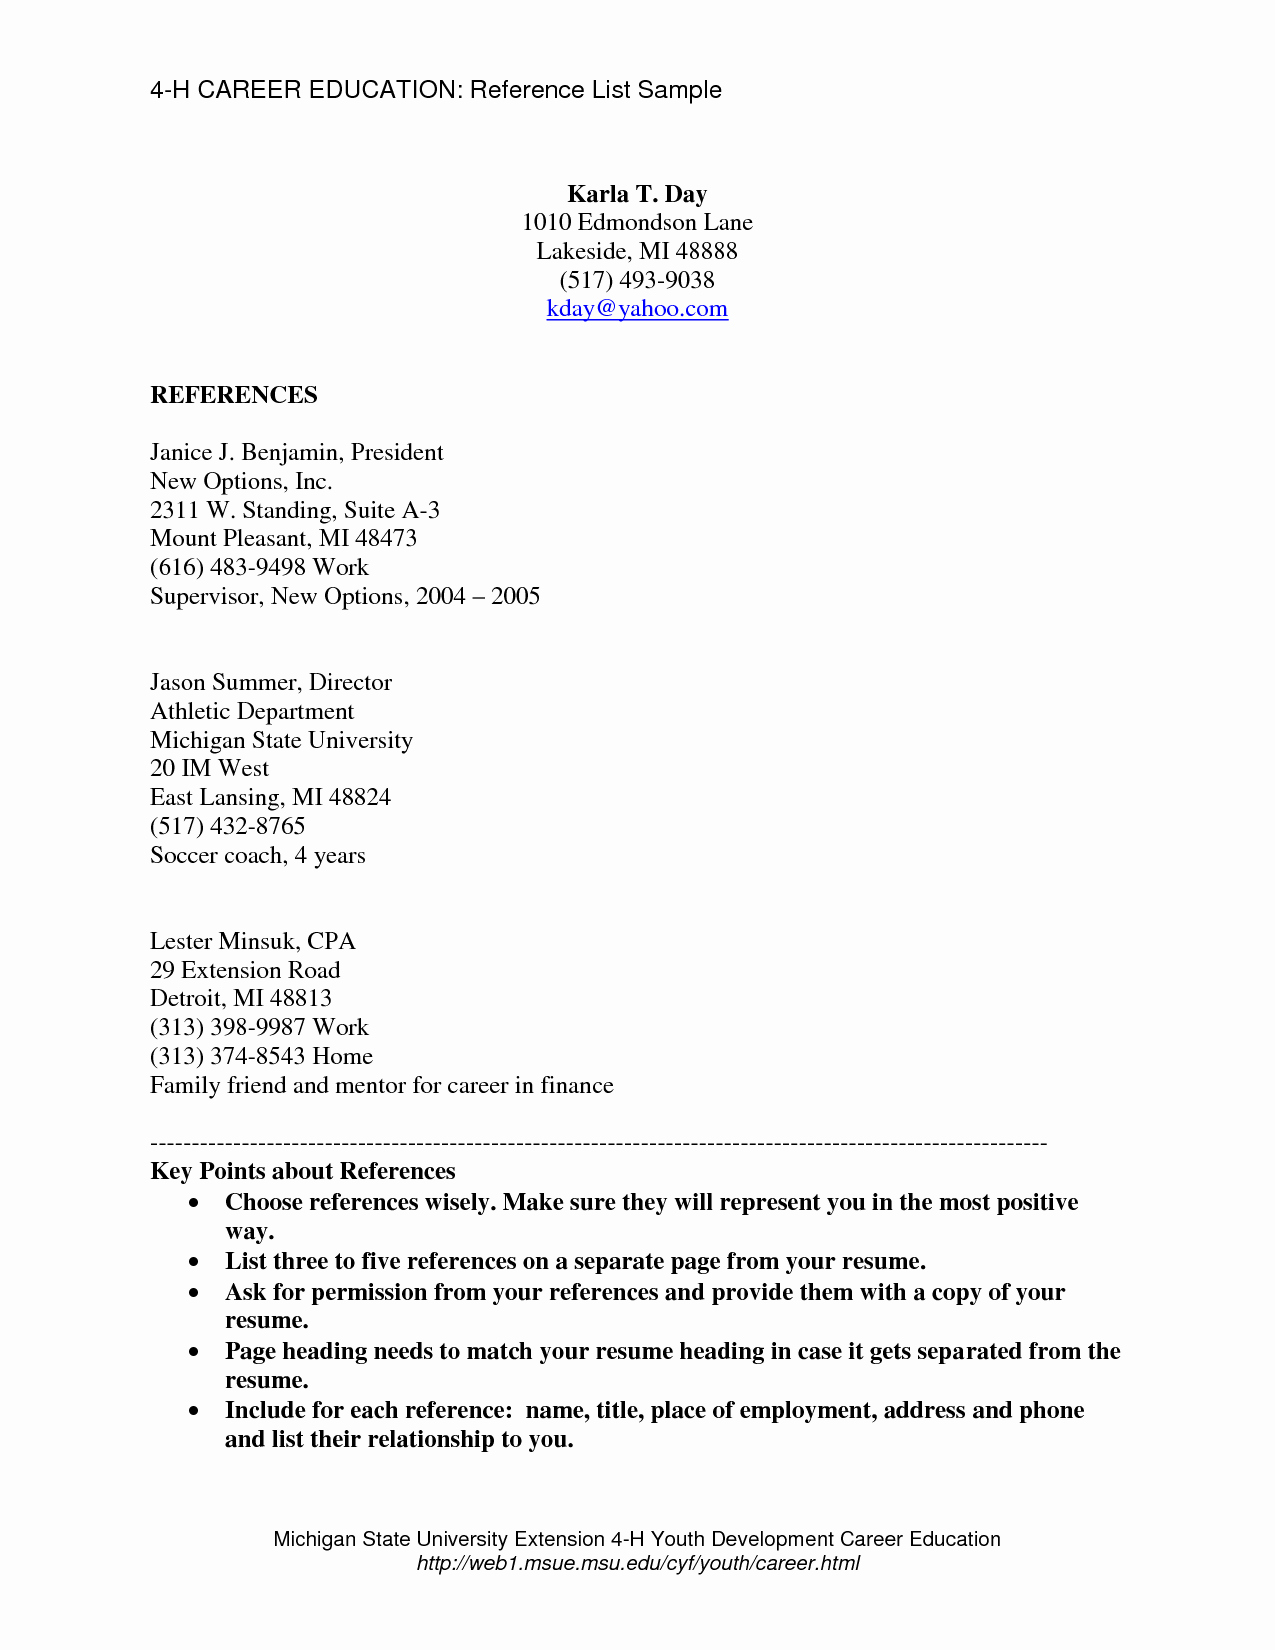 Reference List for A Job Beautiful How to List A Reference A Resume Resume Ideas